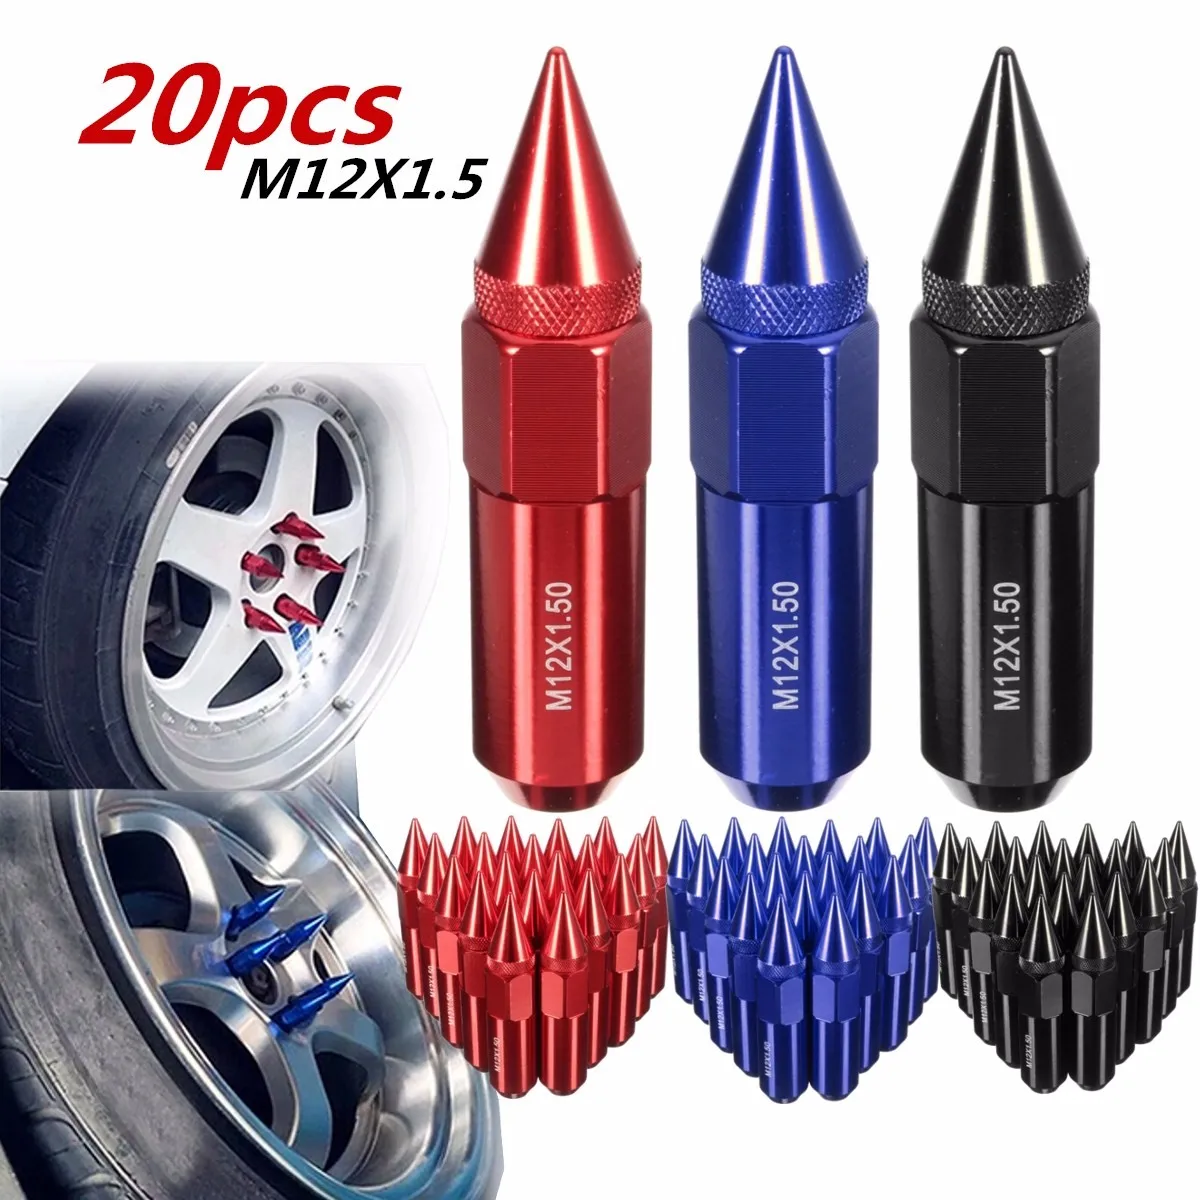 

New 20pcs M12X1.5 Aluminum 60mm Universal Car Wheels Rims Lug Nuts with Spiked Extended Tuner Blue/Red/Black